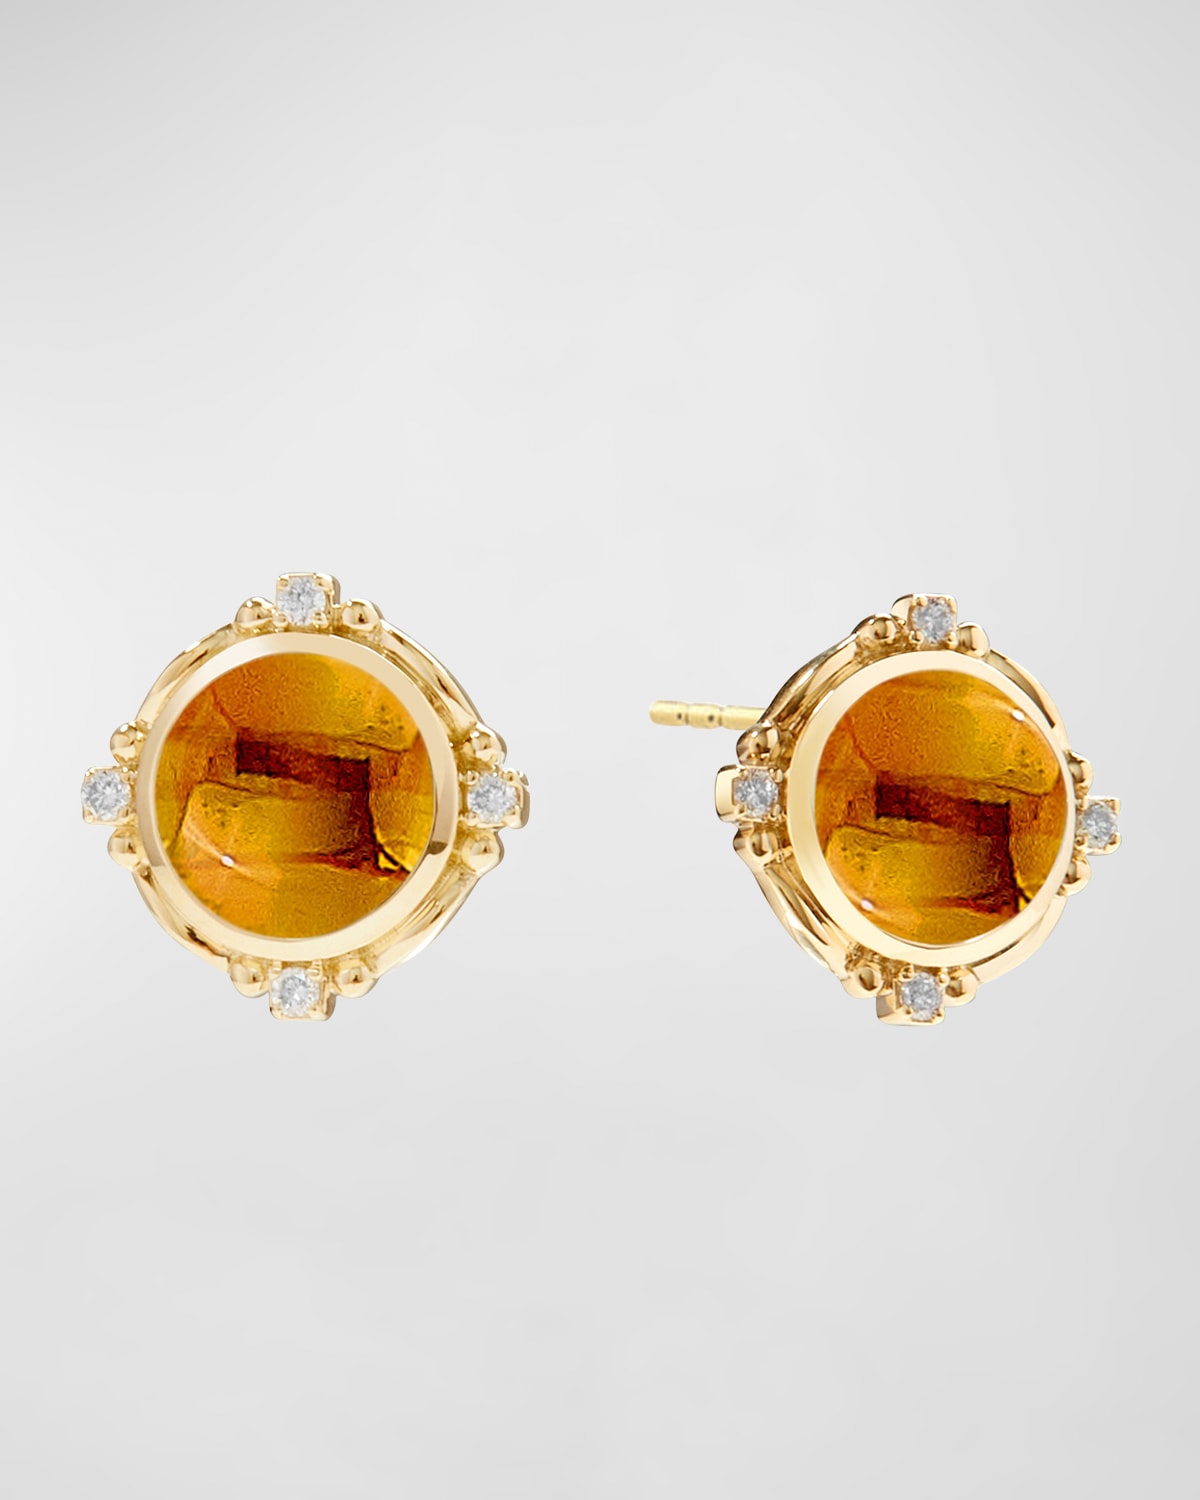 Syna 18k Yellow Gold Mogul Earrings With Gemstones And Diamonds In Citrine